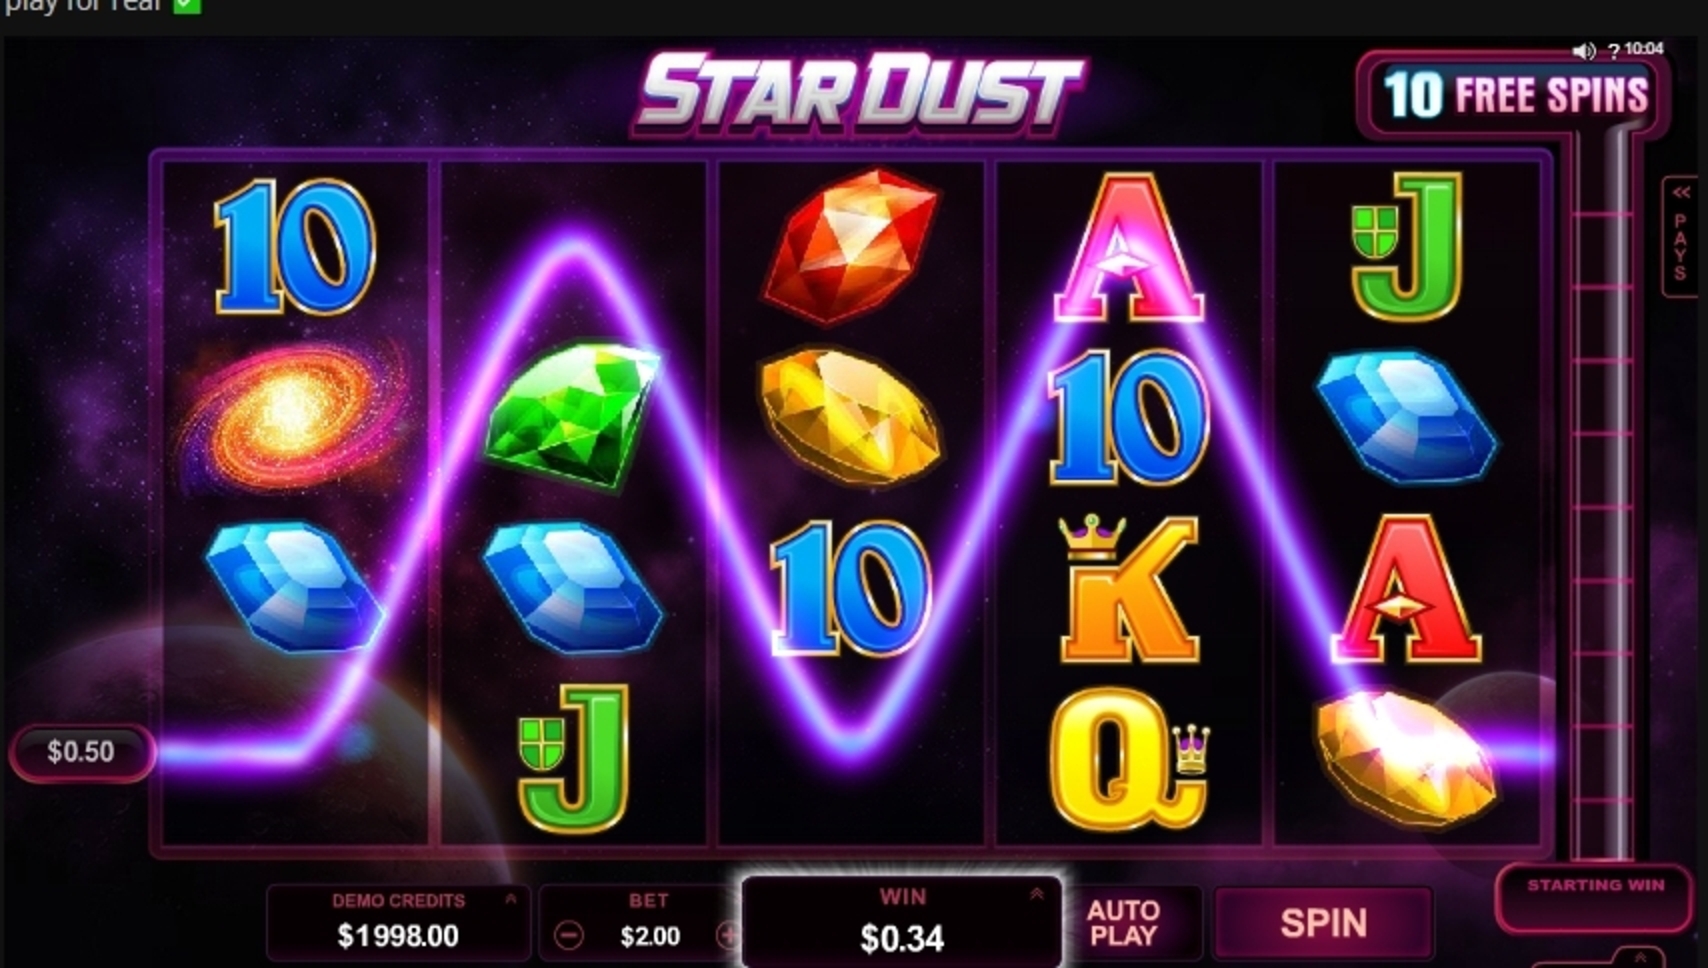 Win Money in Star Dust Free Slot Game by Microgaming